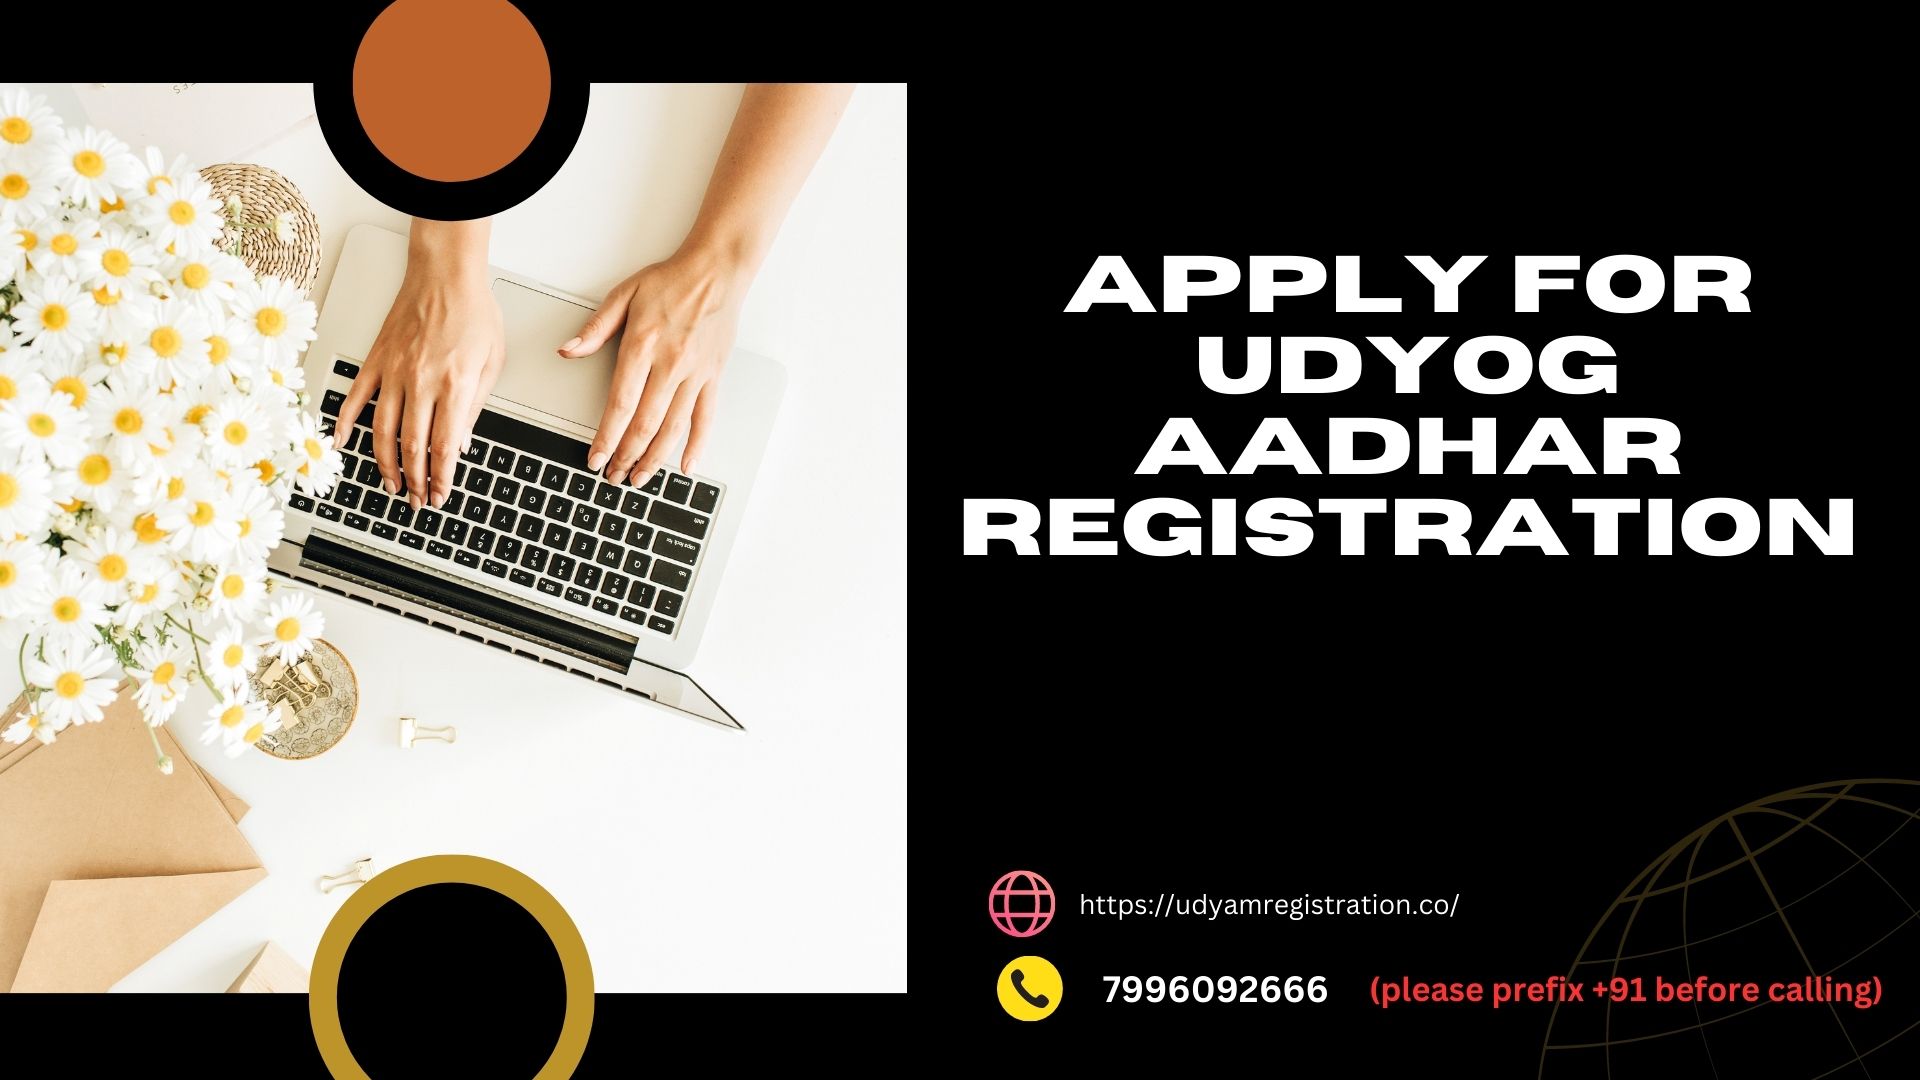 Apply for Udyog Aadhar RegistrationServicesBusiness OffersAll Indiaother